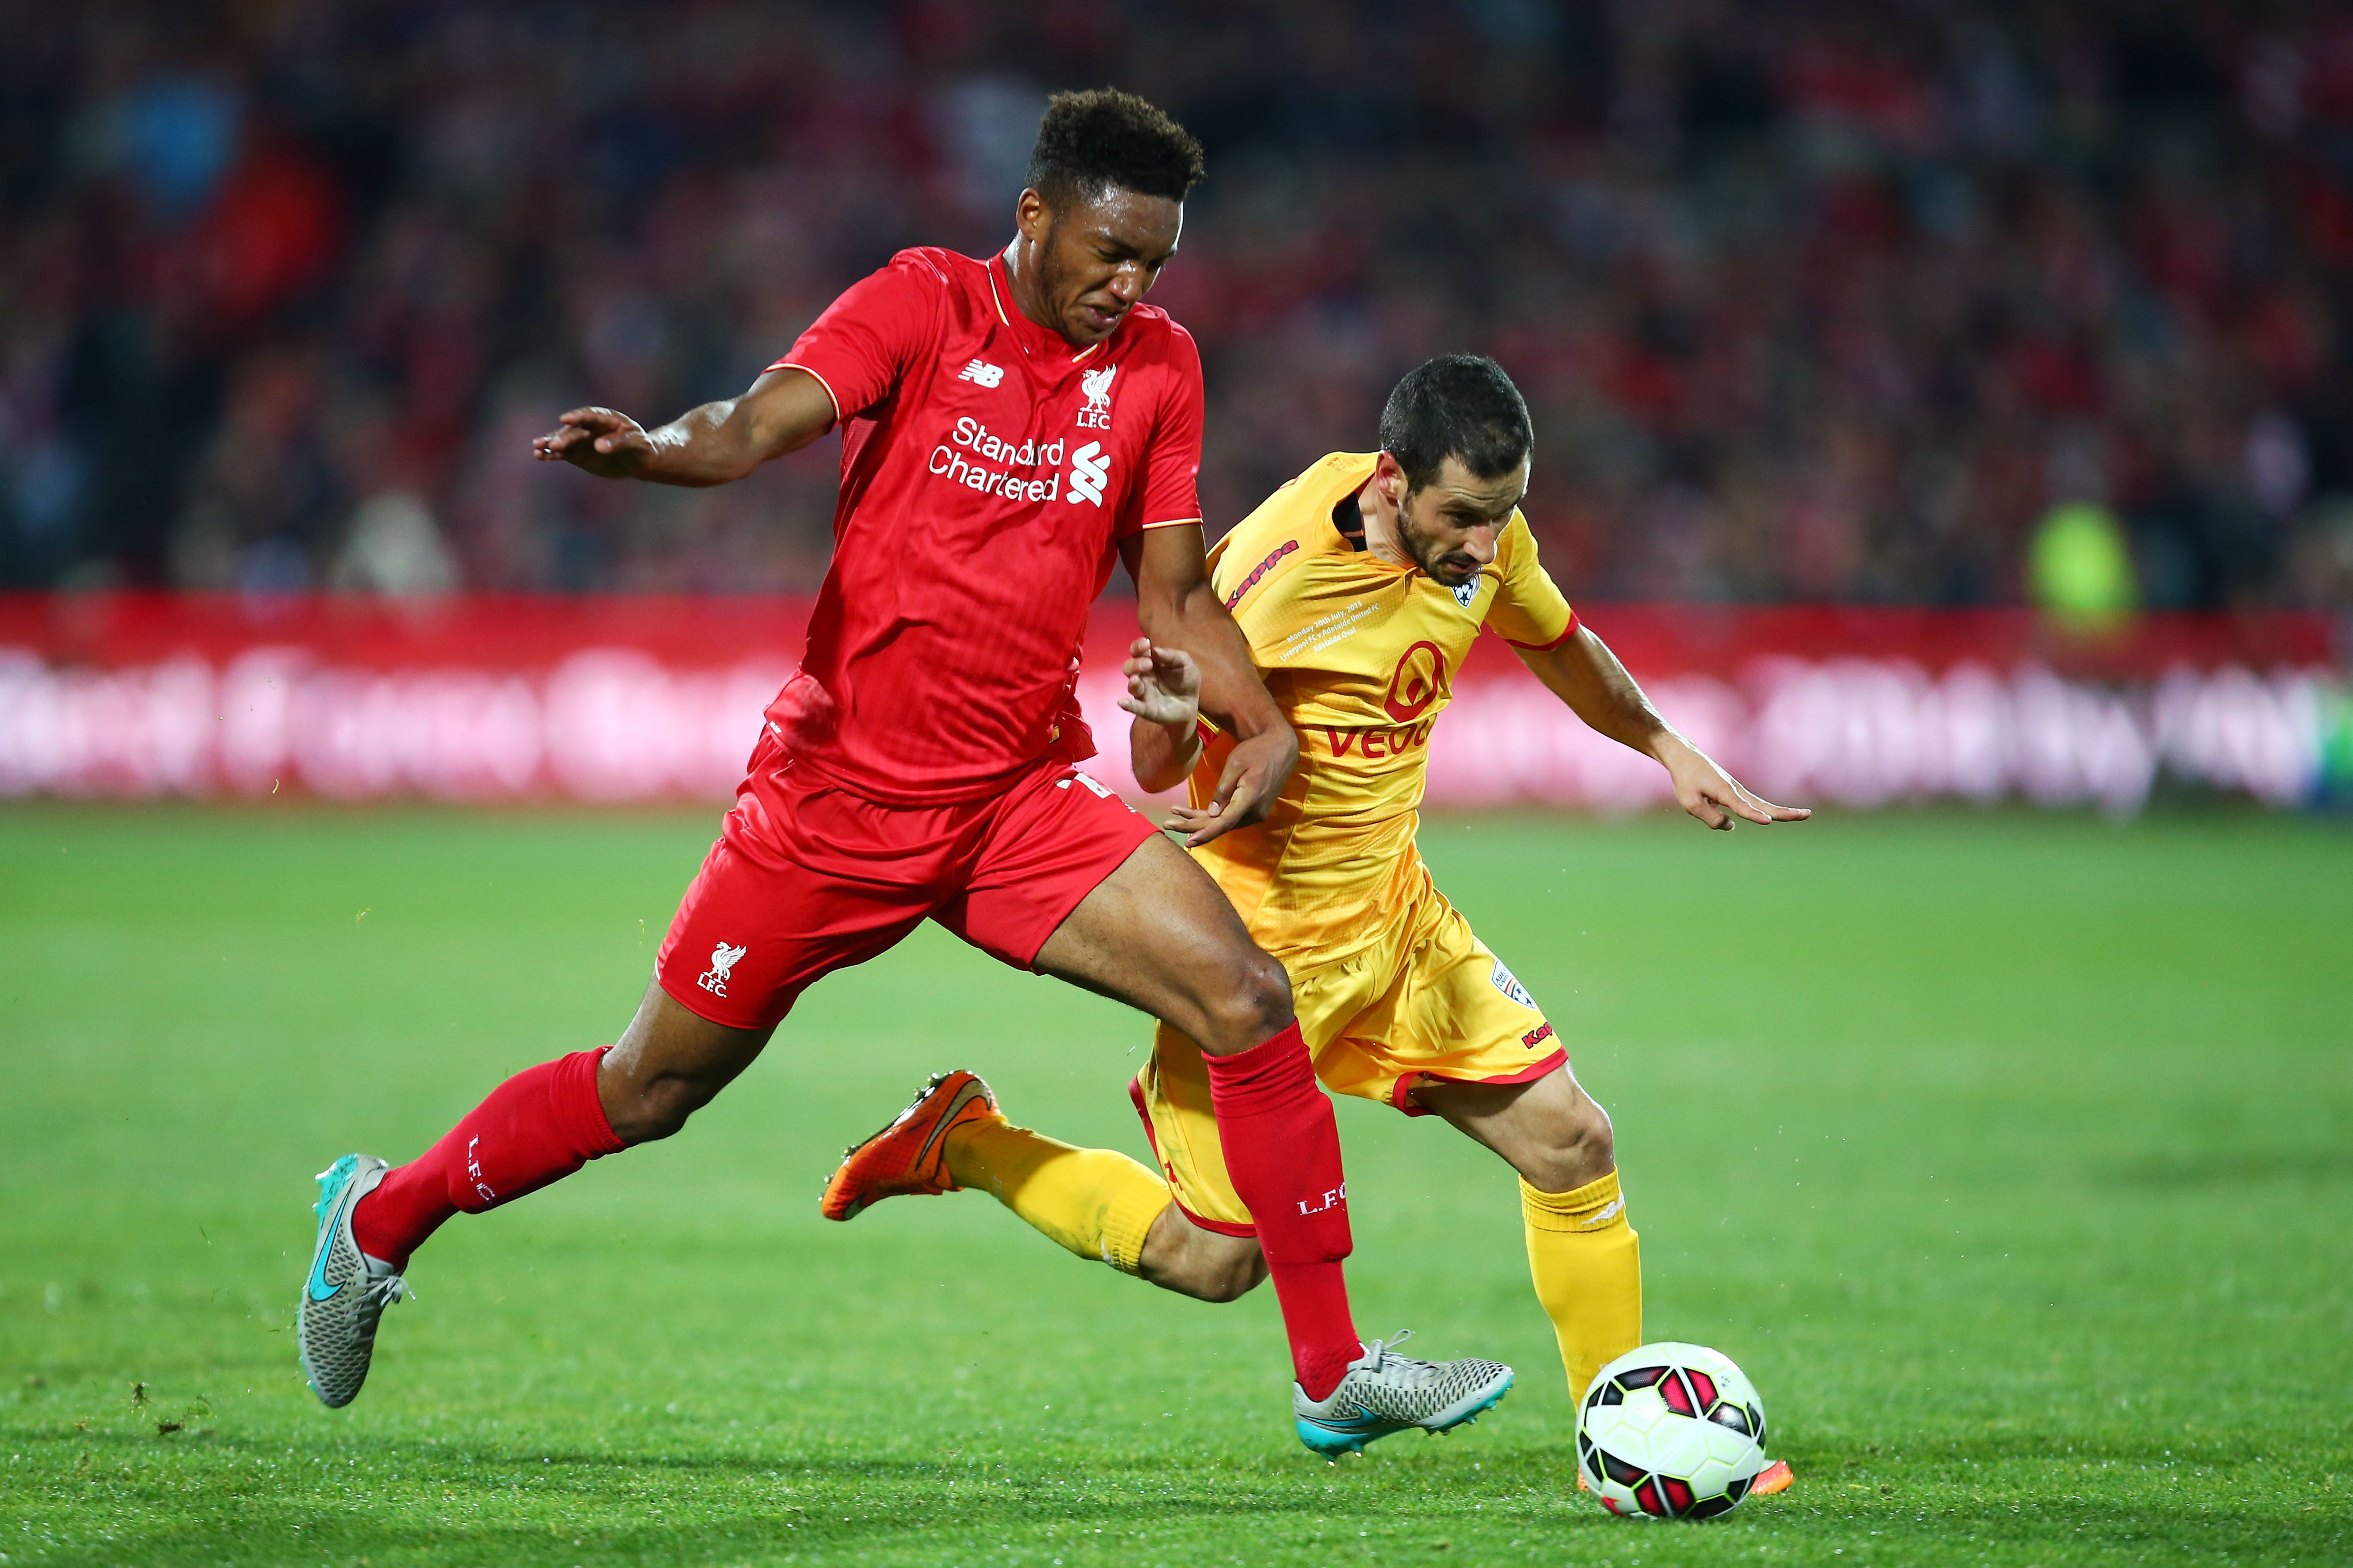 ADELAIDE, AUSTRALIA - JULY 20:  Sergio Cirio of United is challenged by Joe Gomez of Liverpool during the international friendly match between Adelaide United and Liverpool FC at Adelaide Oval on July 20, 2015 in Adelaide, Australia.  (Photo by Matt King/Getty Images)